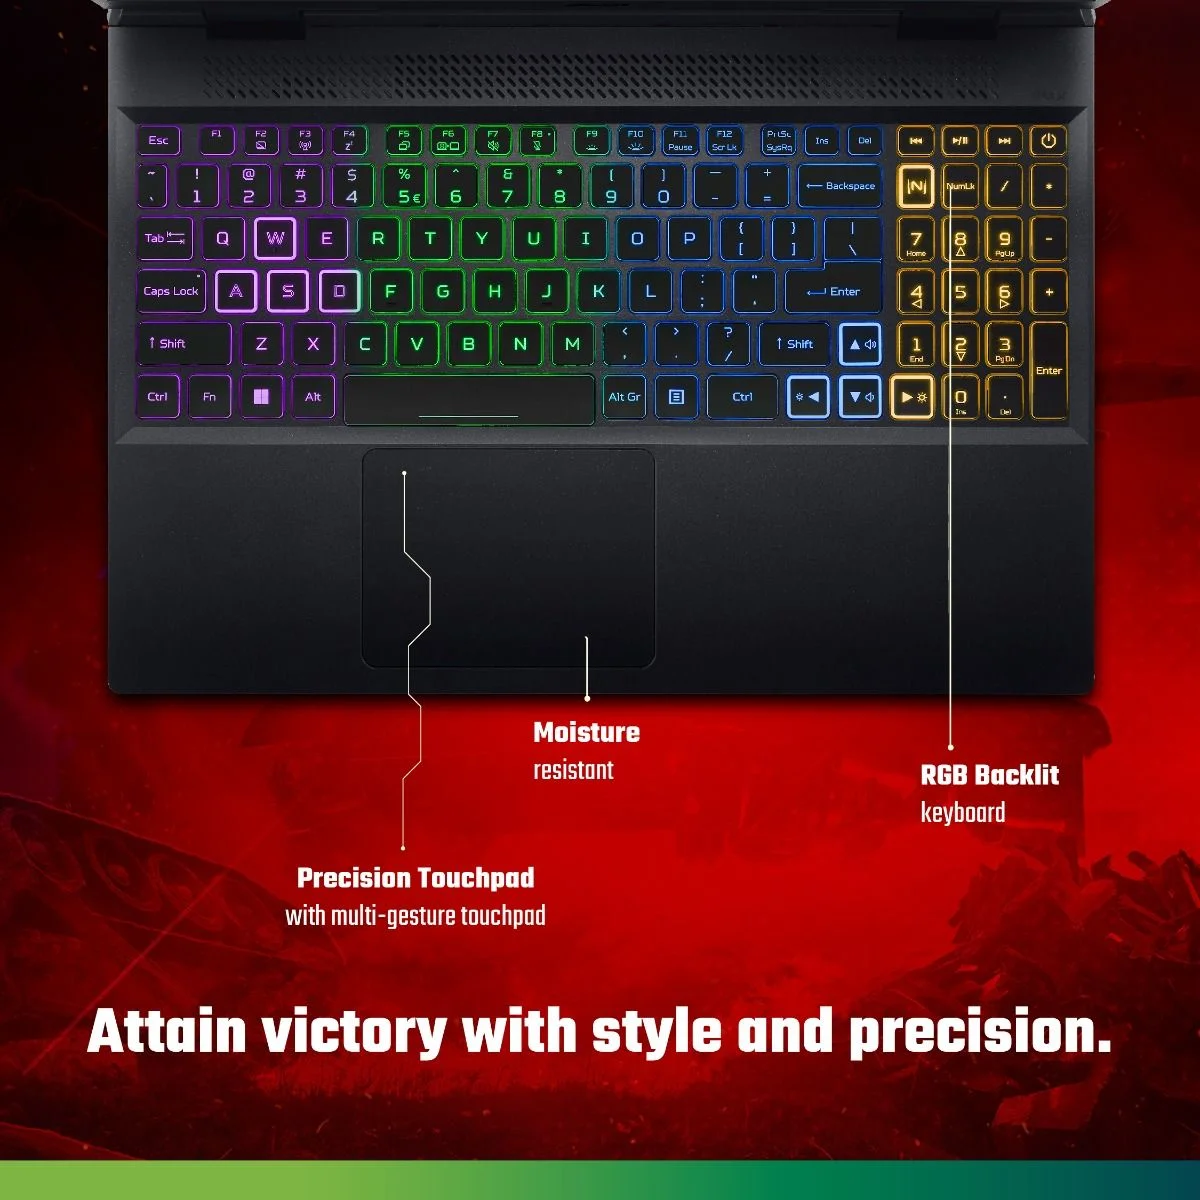 ACER NITRO 5 AMD The Key to Victory Spice things up with the 4-zone1 RGB keyboard1 and take command of the inner workings of the laptop via the dedicated NitroSense Key. The WASD and arrow keys are also highlighted for easy visibility for those clutch moments.